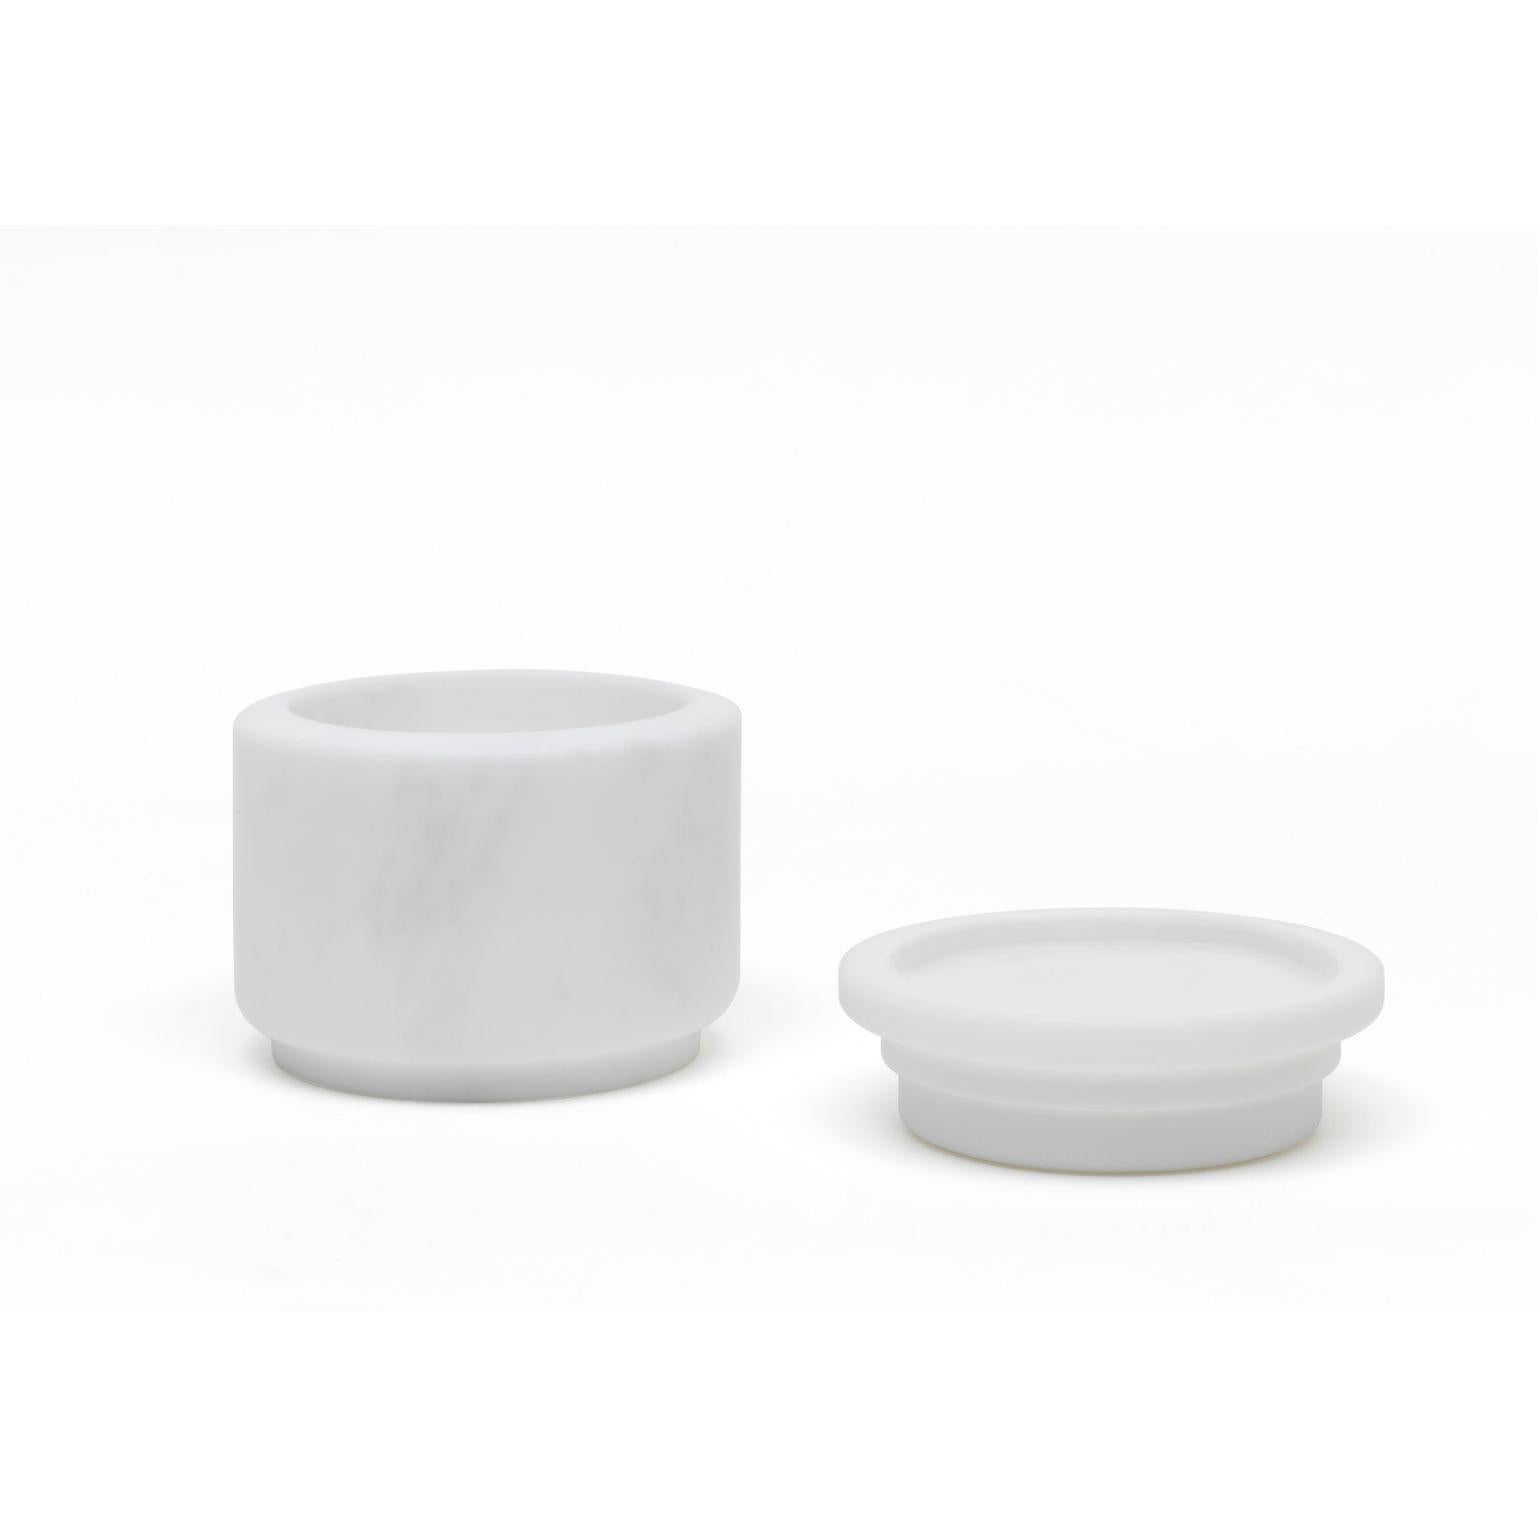 Pyxis - small pot - white by Ivan Colominas
Pyxis Collection
Dimensions: 12.6 x 11 cm
Materials: Bianco Michelangelo
Also available: Nero Marquinia, medium & large
A refined collection articulated through cylinders that vary only in Size and